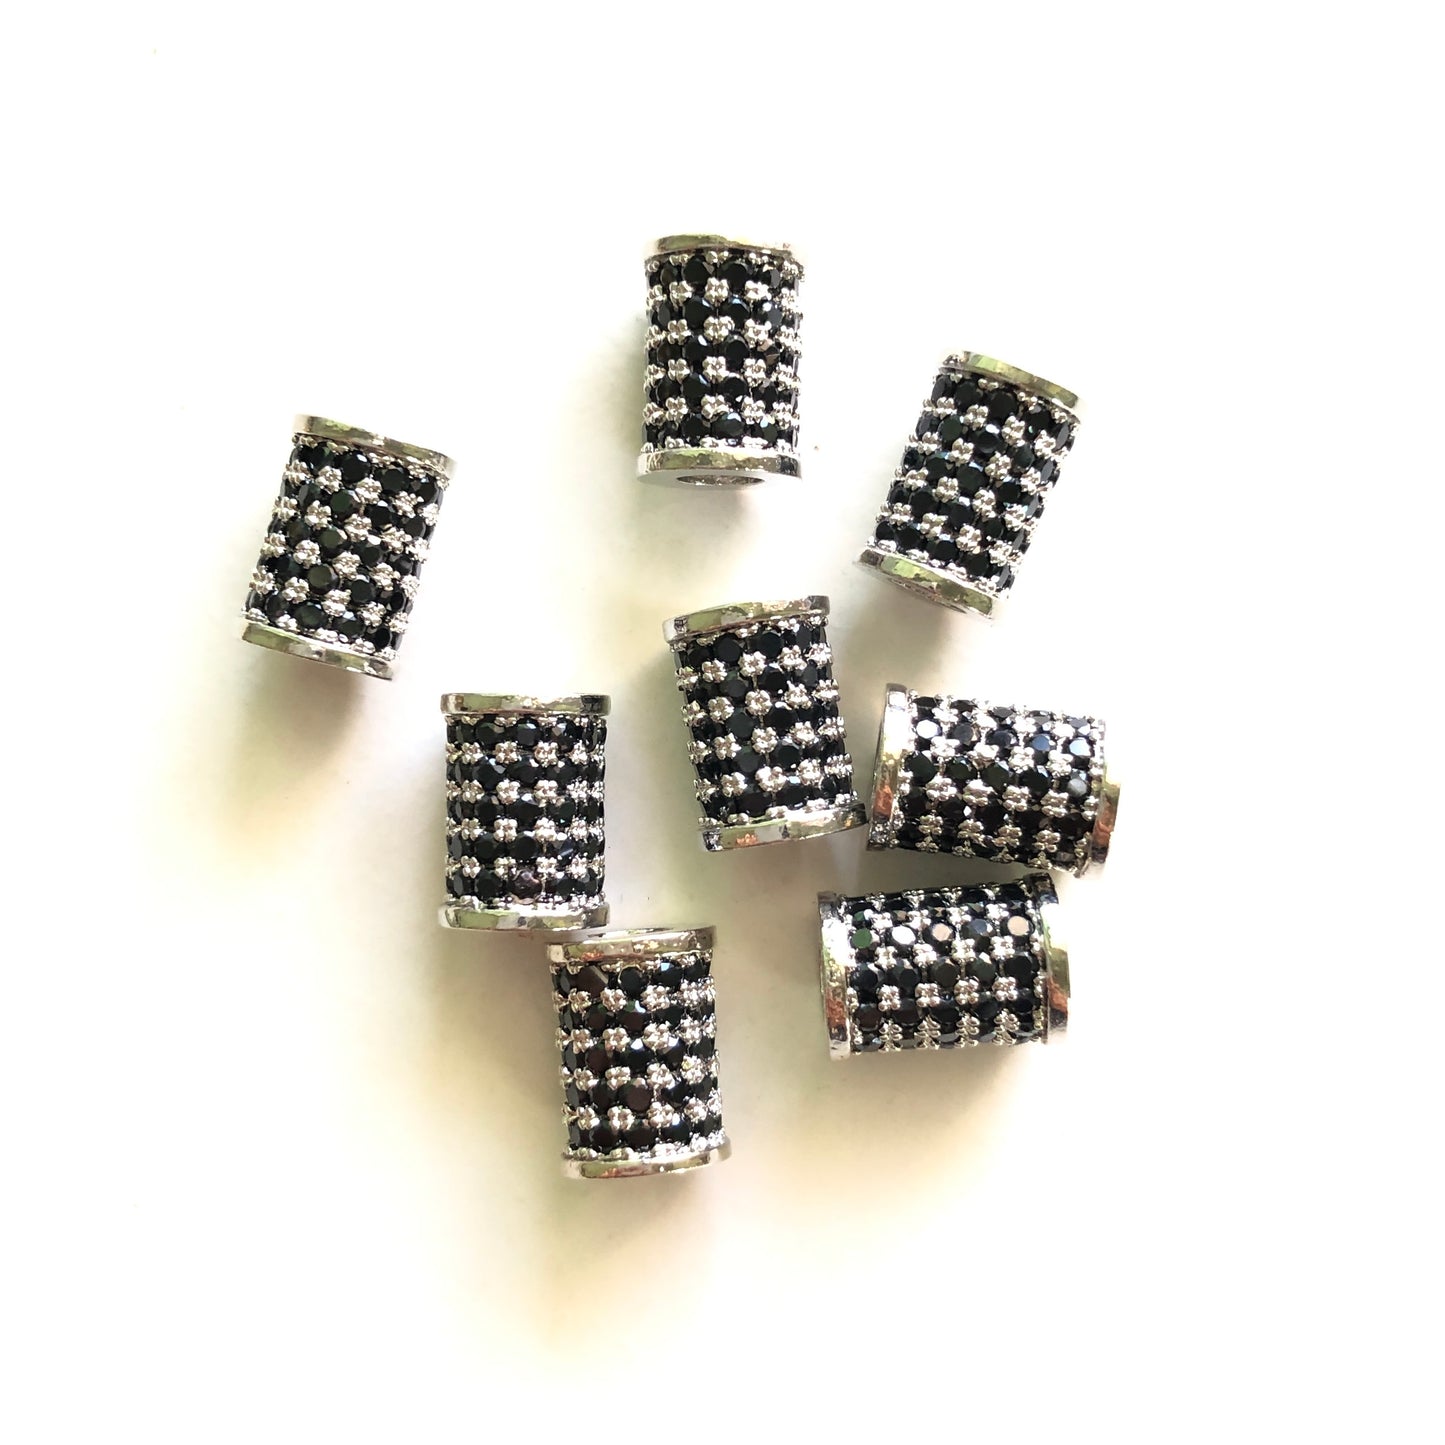 20pcs/lot 10*7mm Black CZ Paved Tube Spacers Silver CZ Paved Spacers Tube Bar Centerpieces Charms Beads Beyond